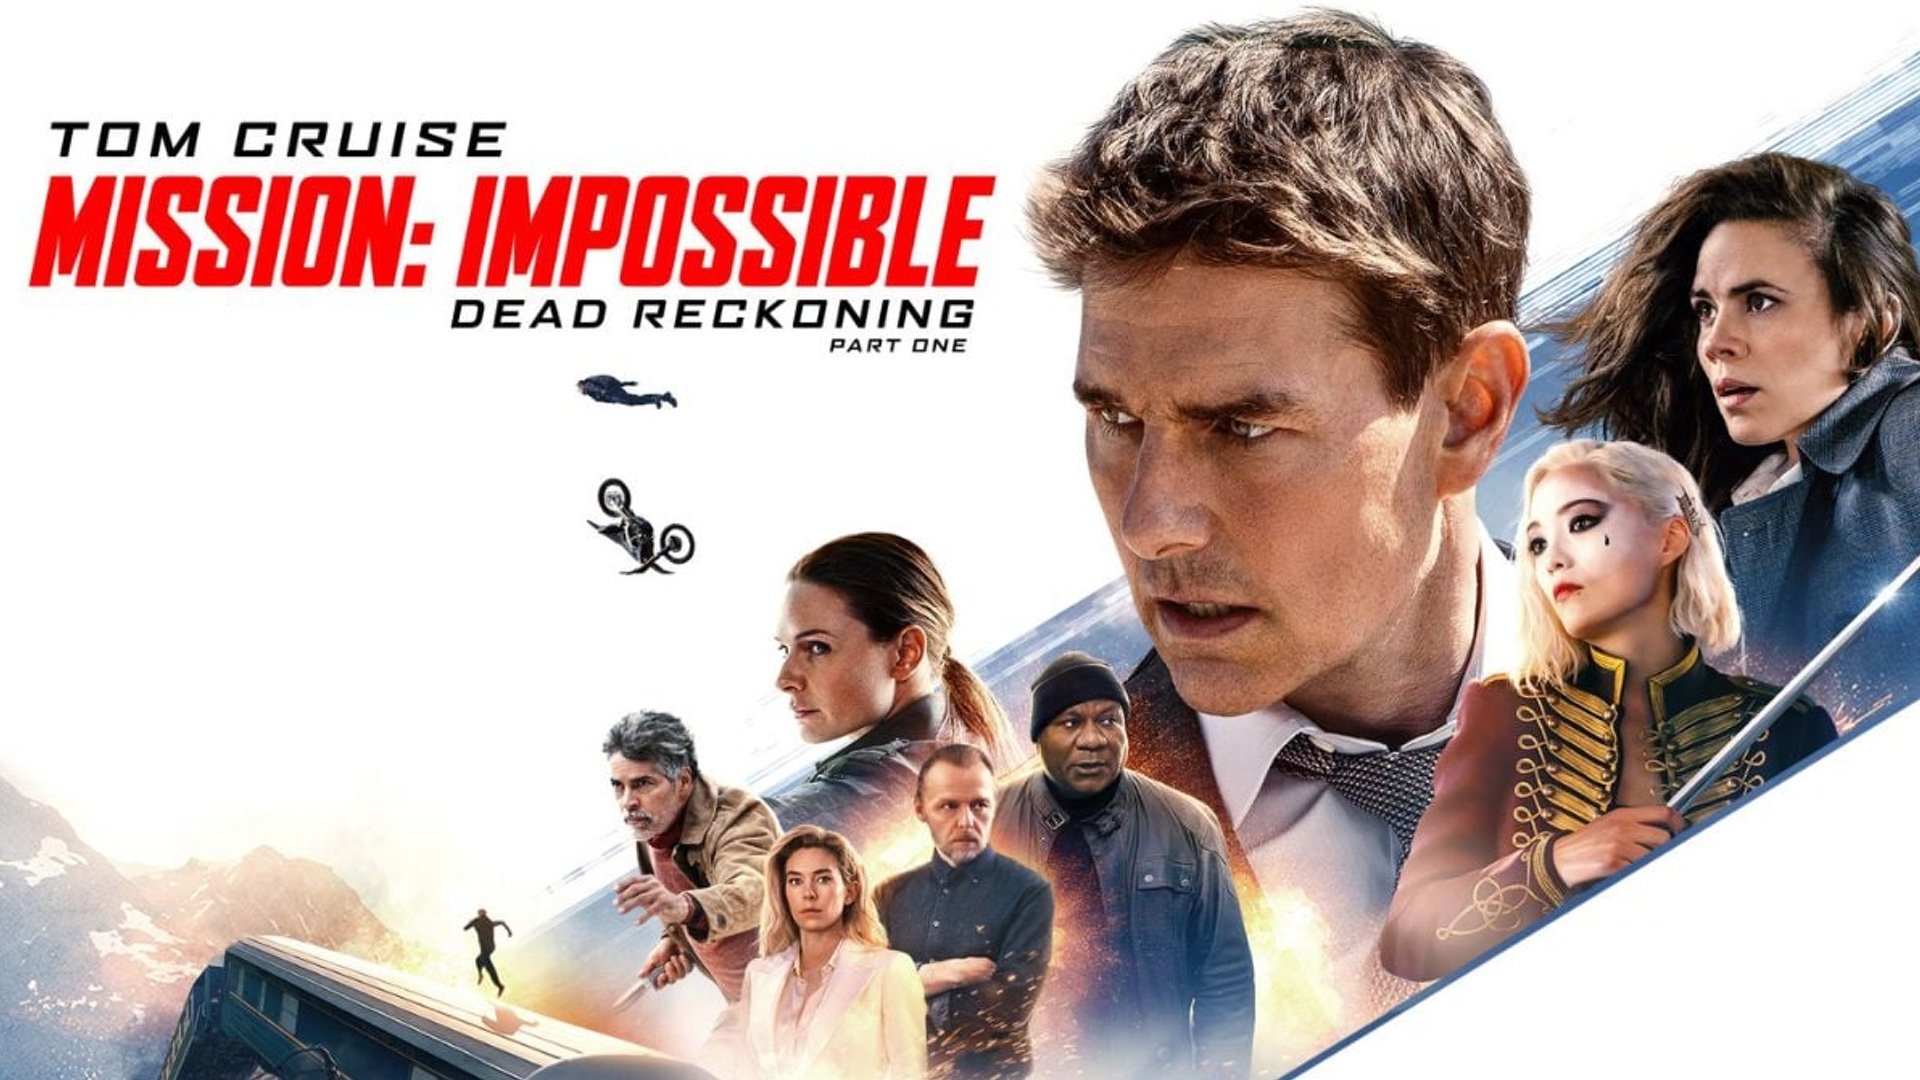 MISSION IMPOSSIBLE - DEAD RECKONING PART ONE Blu-ray and Digital